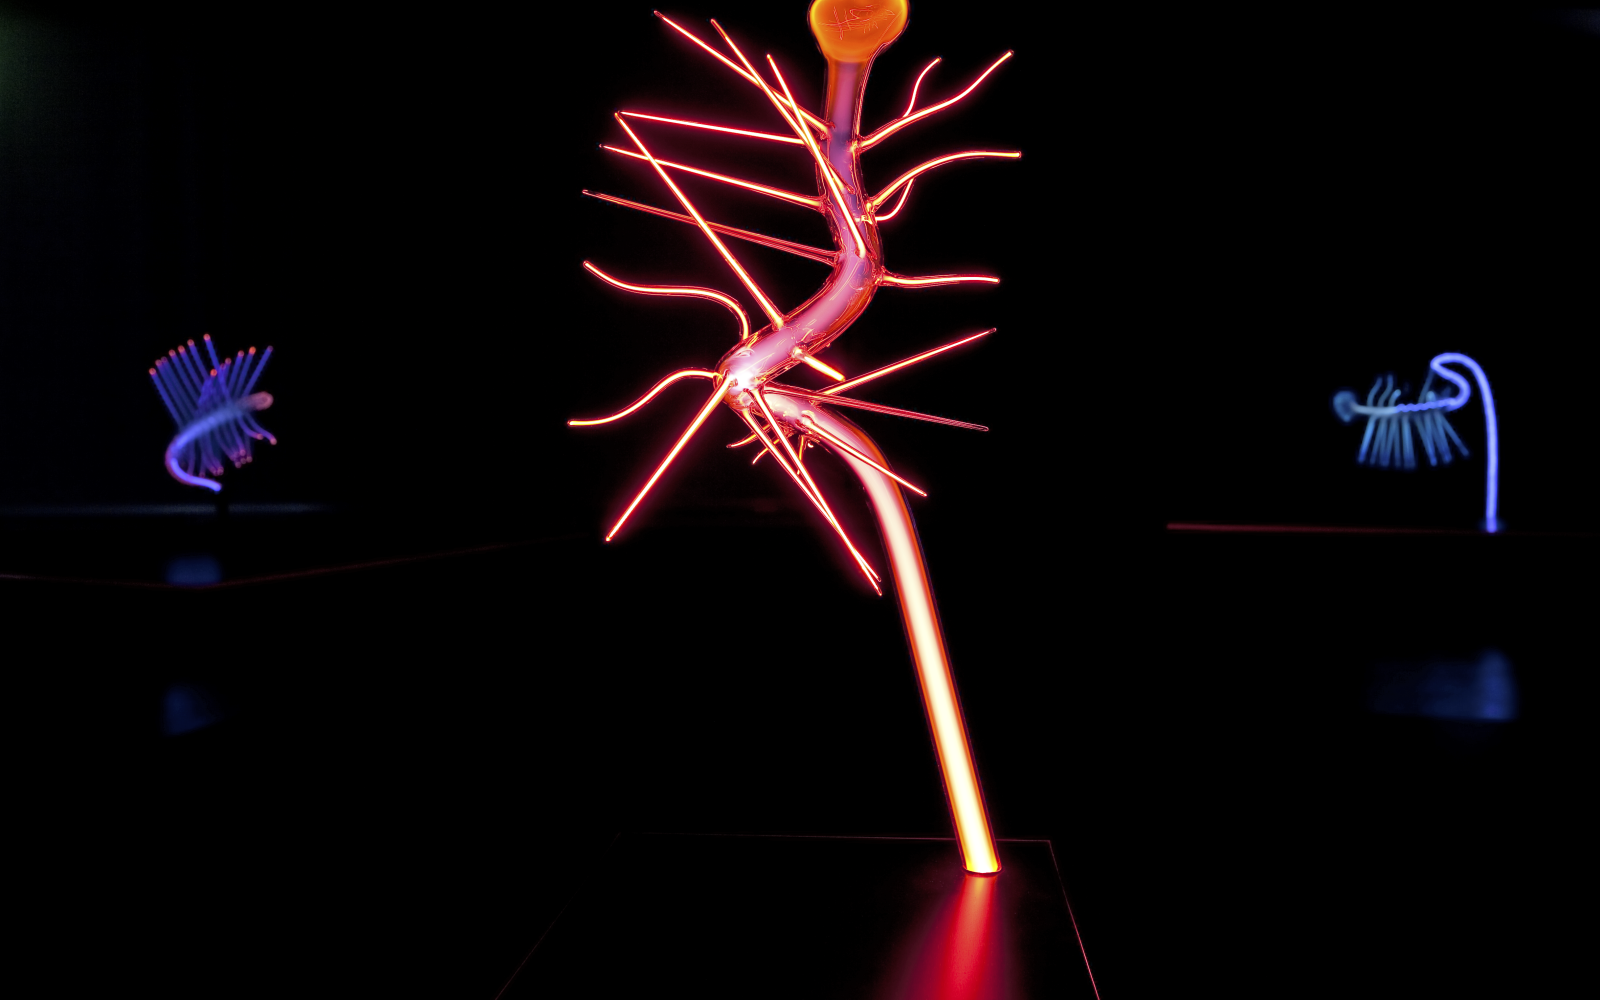 You can see a red glowing, narrow and curved figure with spikes against a black background. She is surrounded by two other blue figures of her kind. 